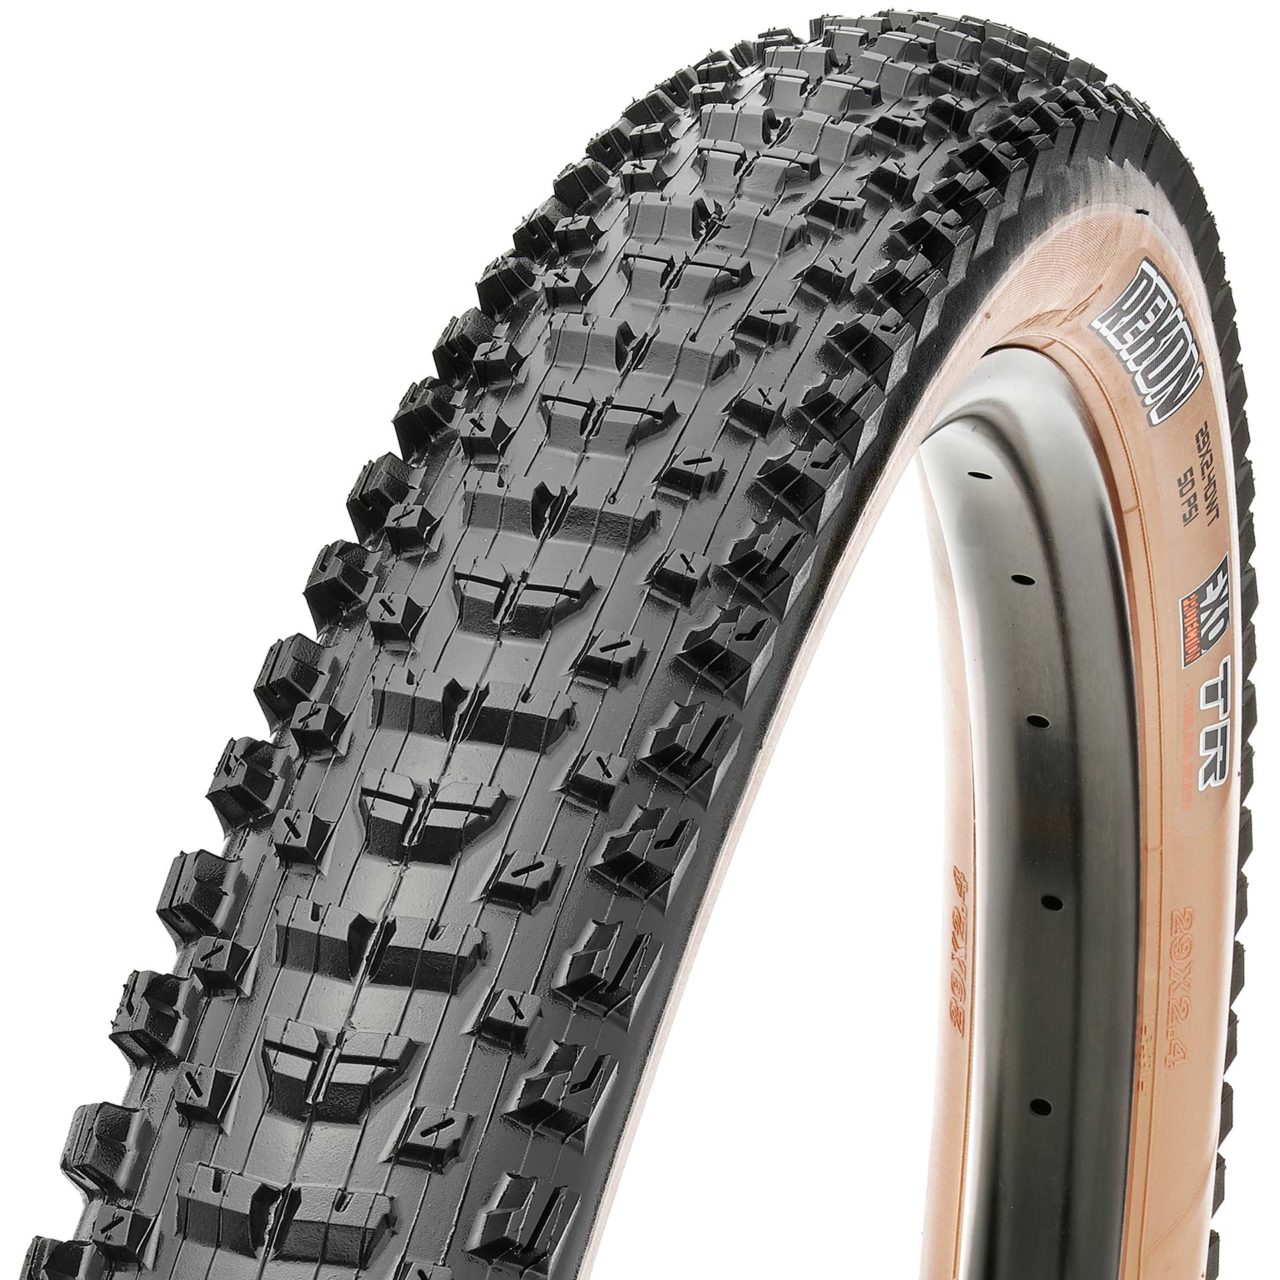 Maxxis Rekon bicycle tire with tan sidewall.